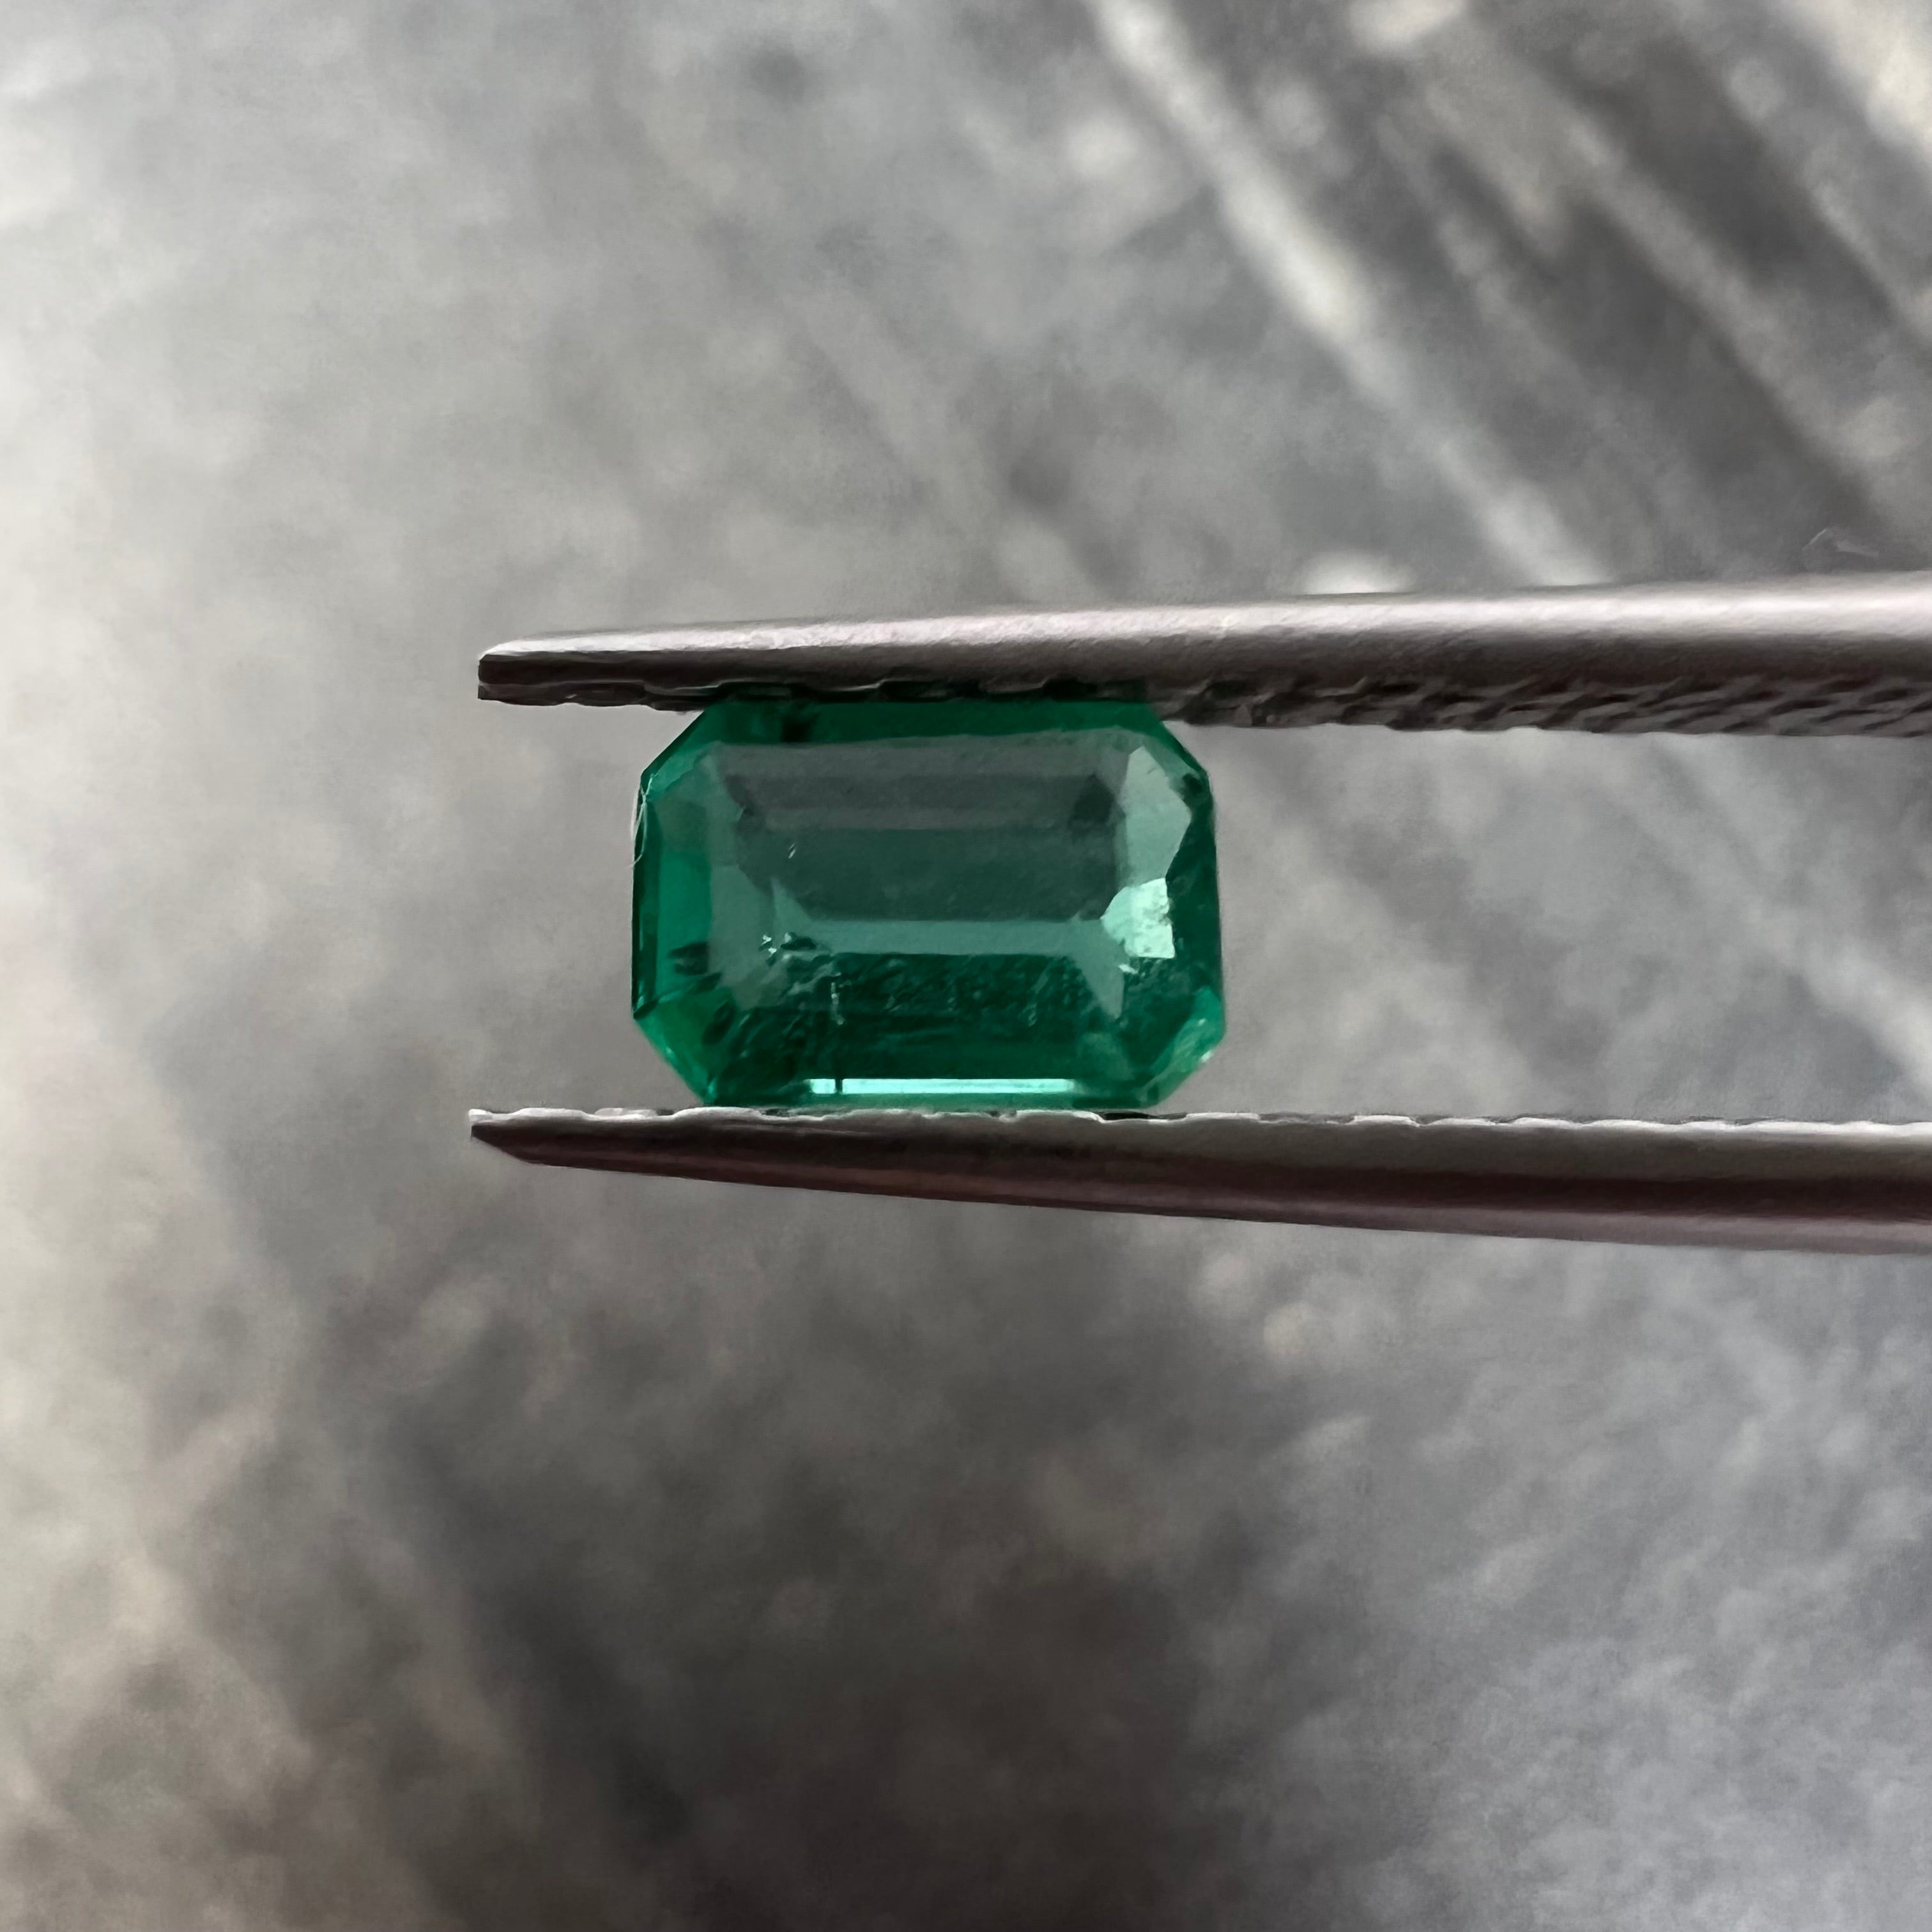 .26CT Loose Natural Colombian Emerald Cut 4.83x3.41x2.14mm Earth mined Gemstone